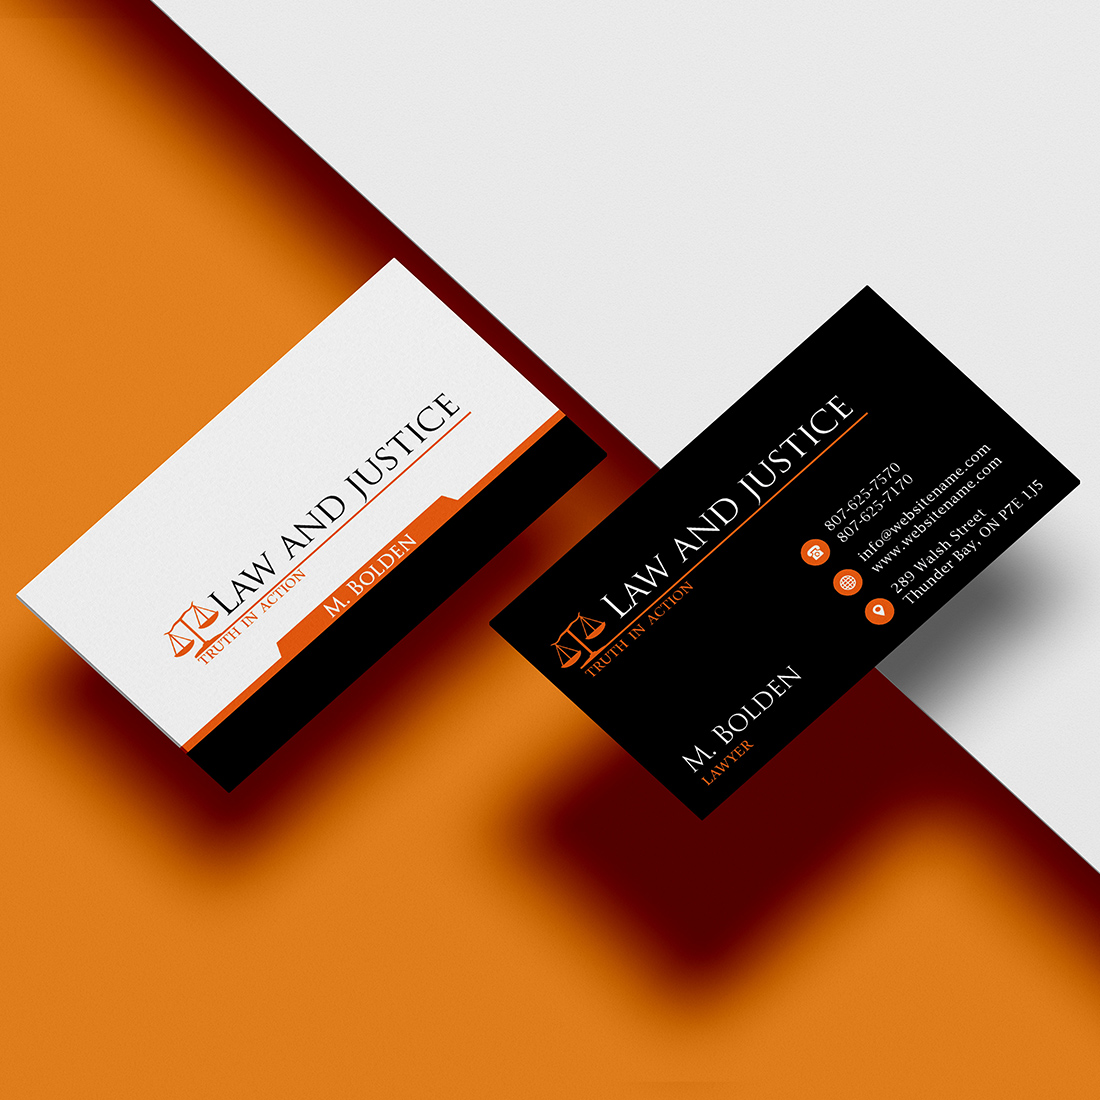 Stylish Lawyer Business Card Design cover image.